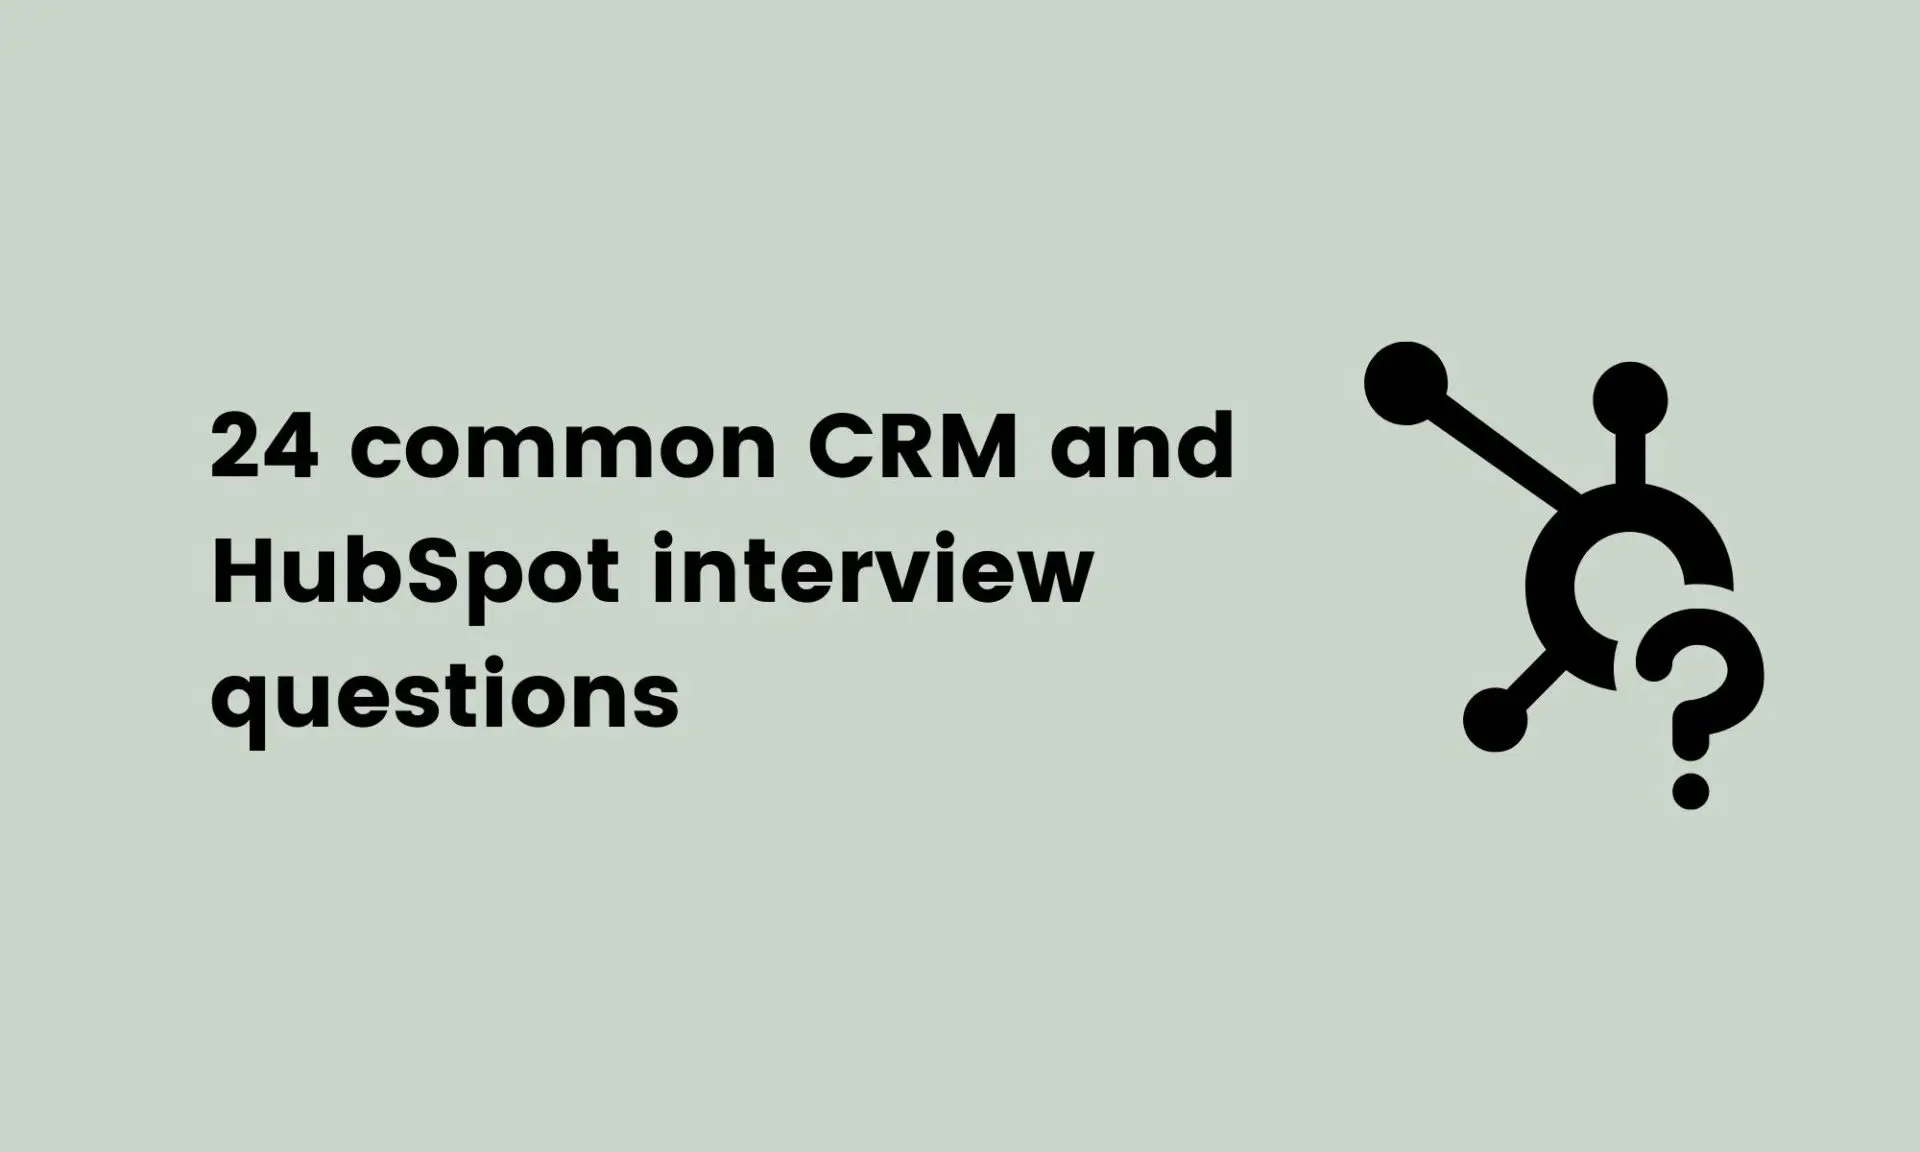 image showing 24 common CRM and HubSpot interview questions 